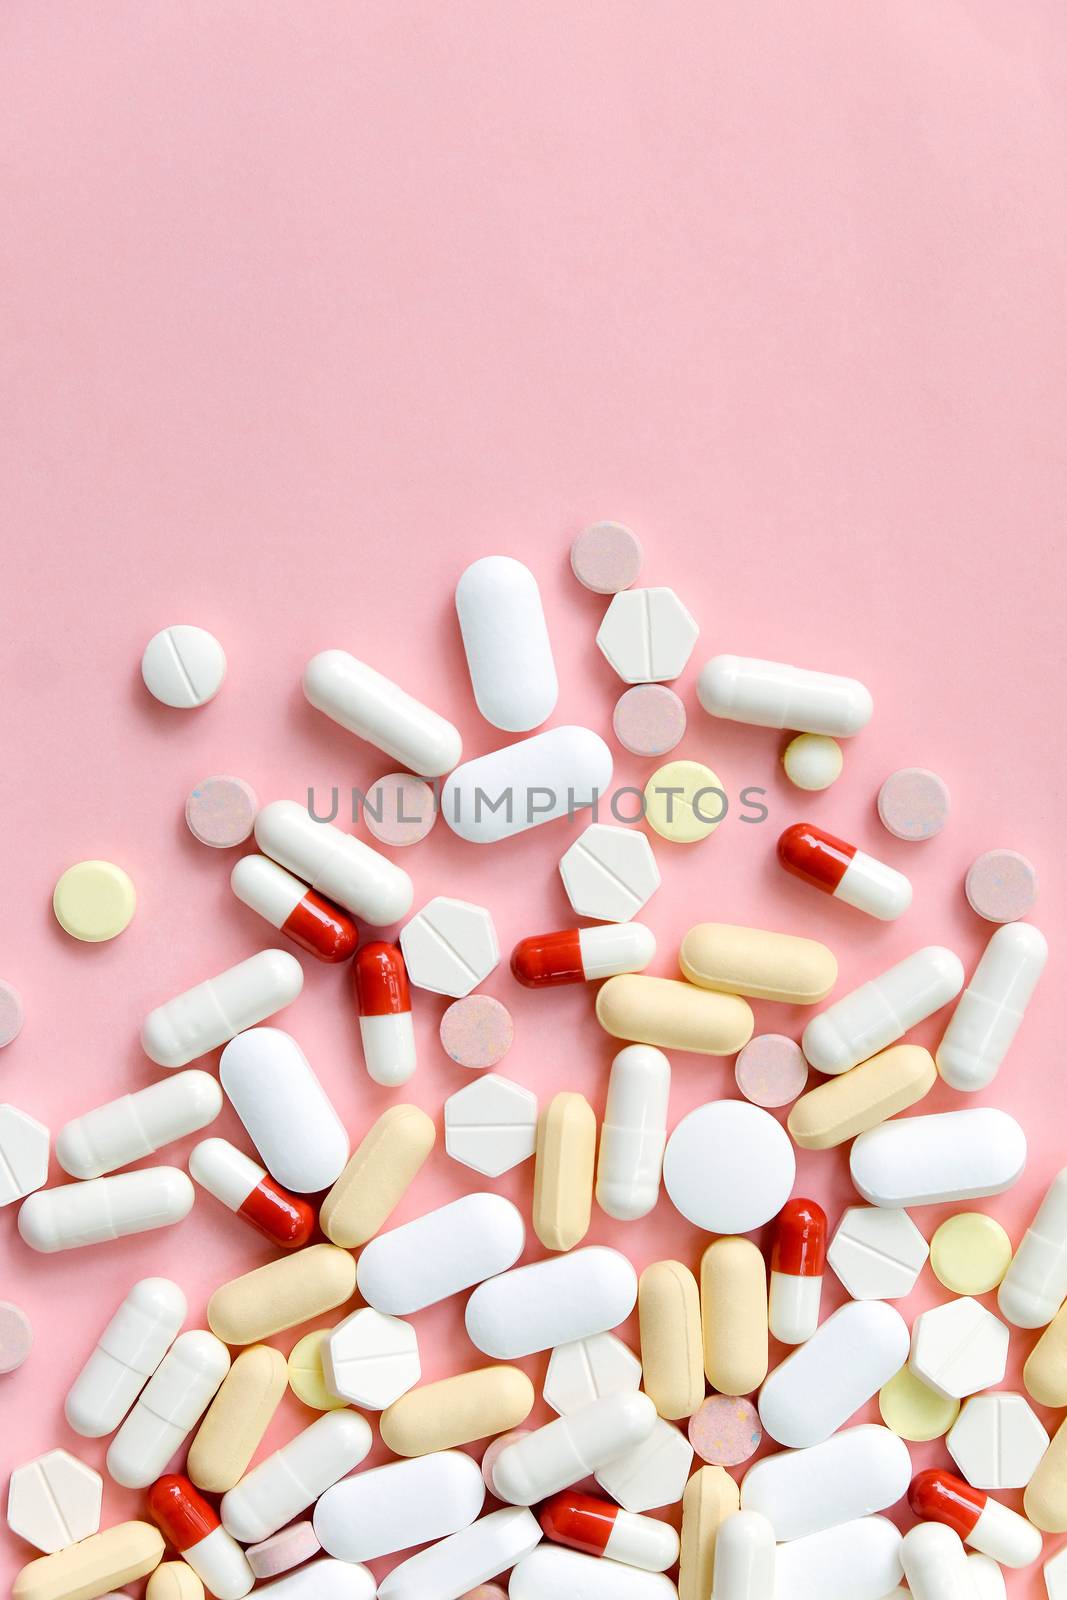 Colorful Assortment Of Medicine background by ponsulak